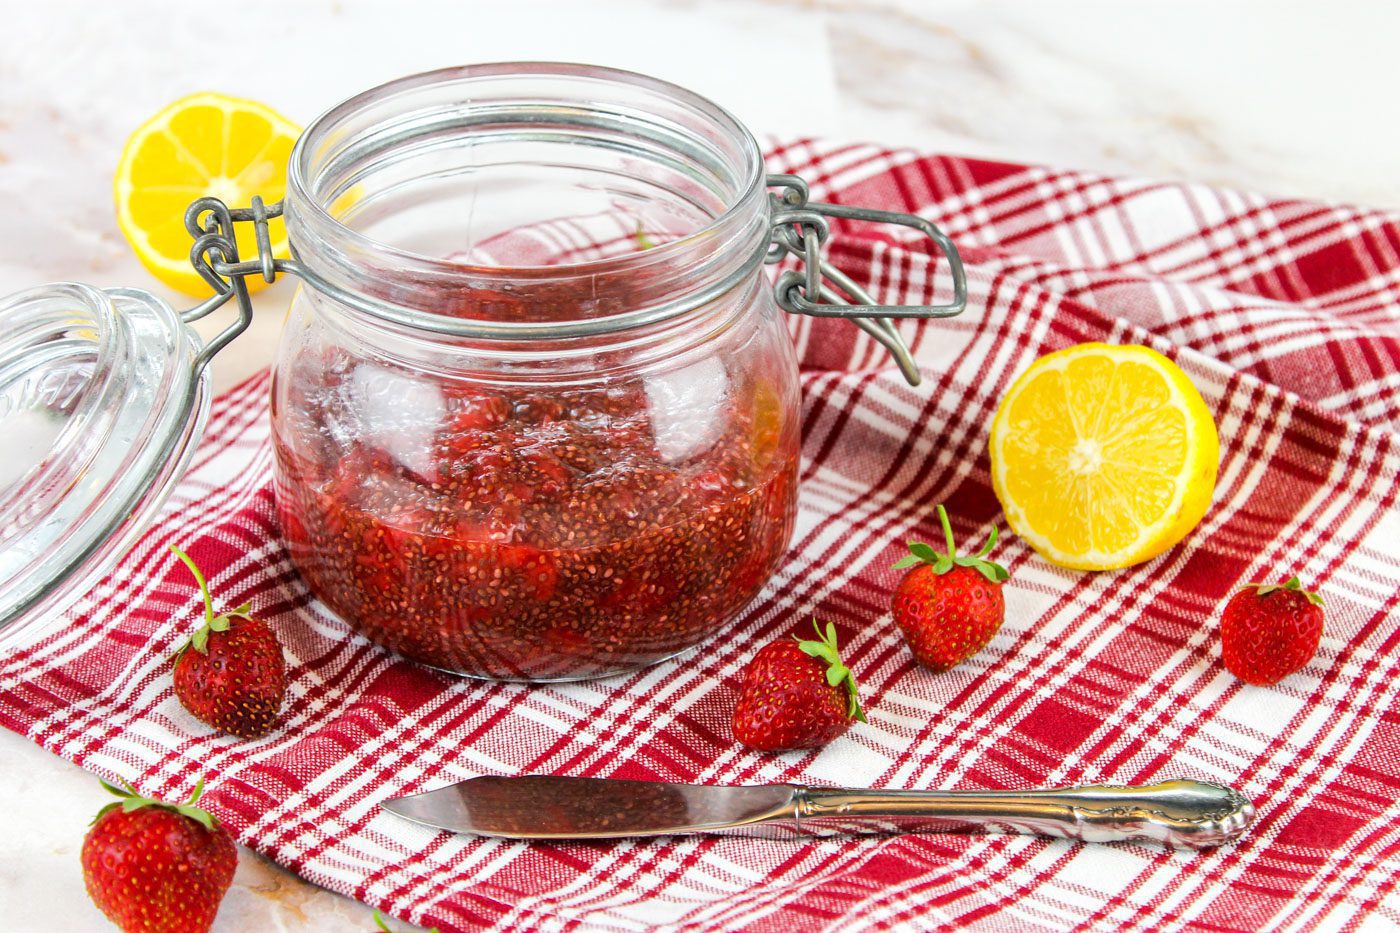 glass jar full of jam sits on top of a red plaid towel covered in strawberries and lemons